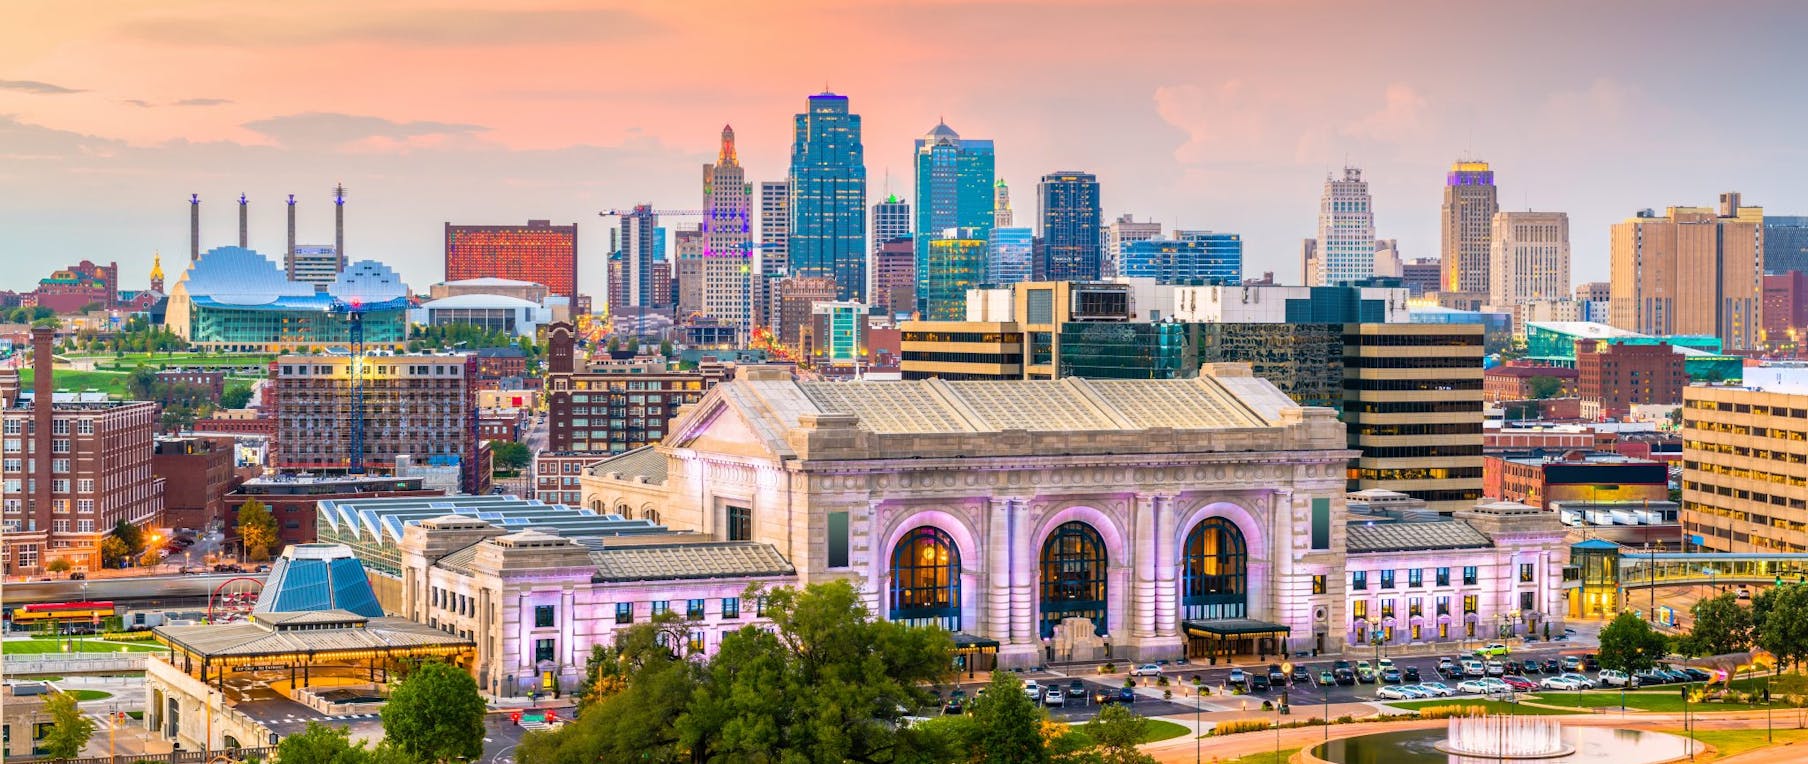 Union Station and downtown Kansas City